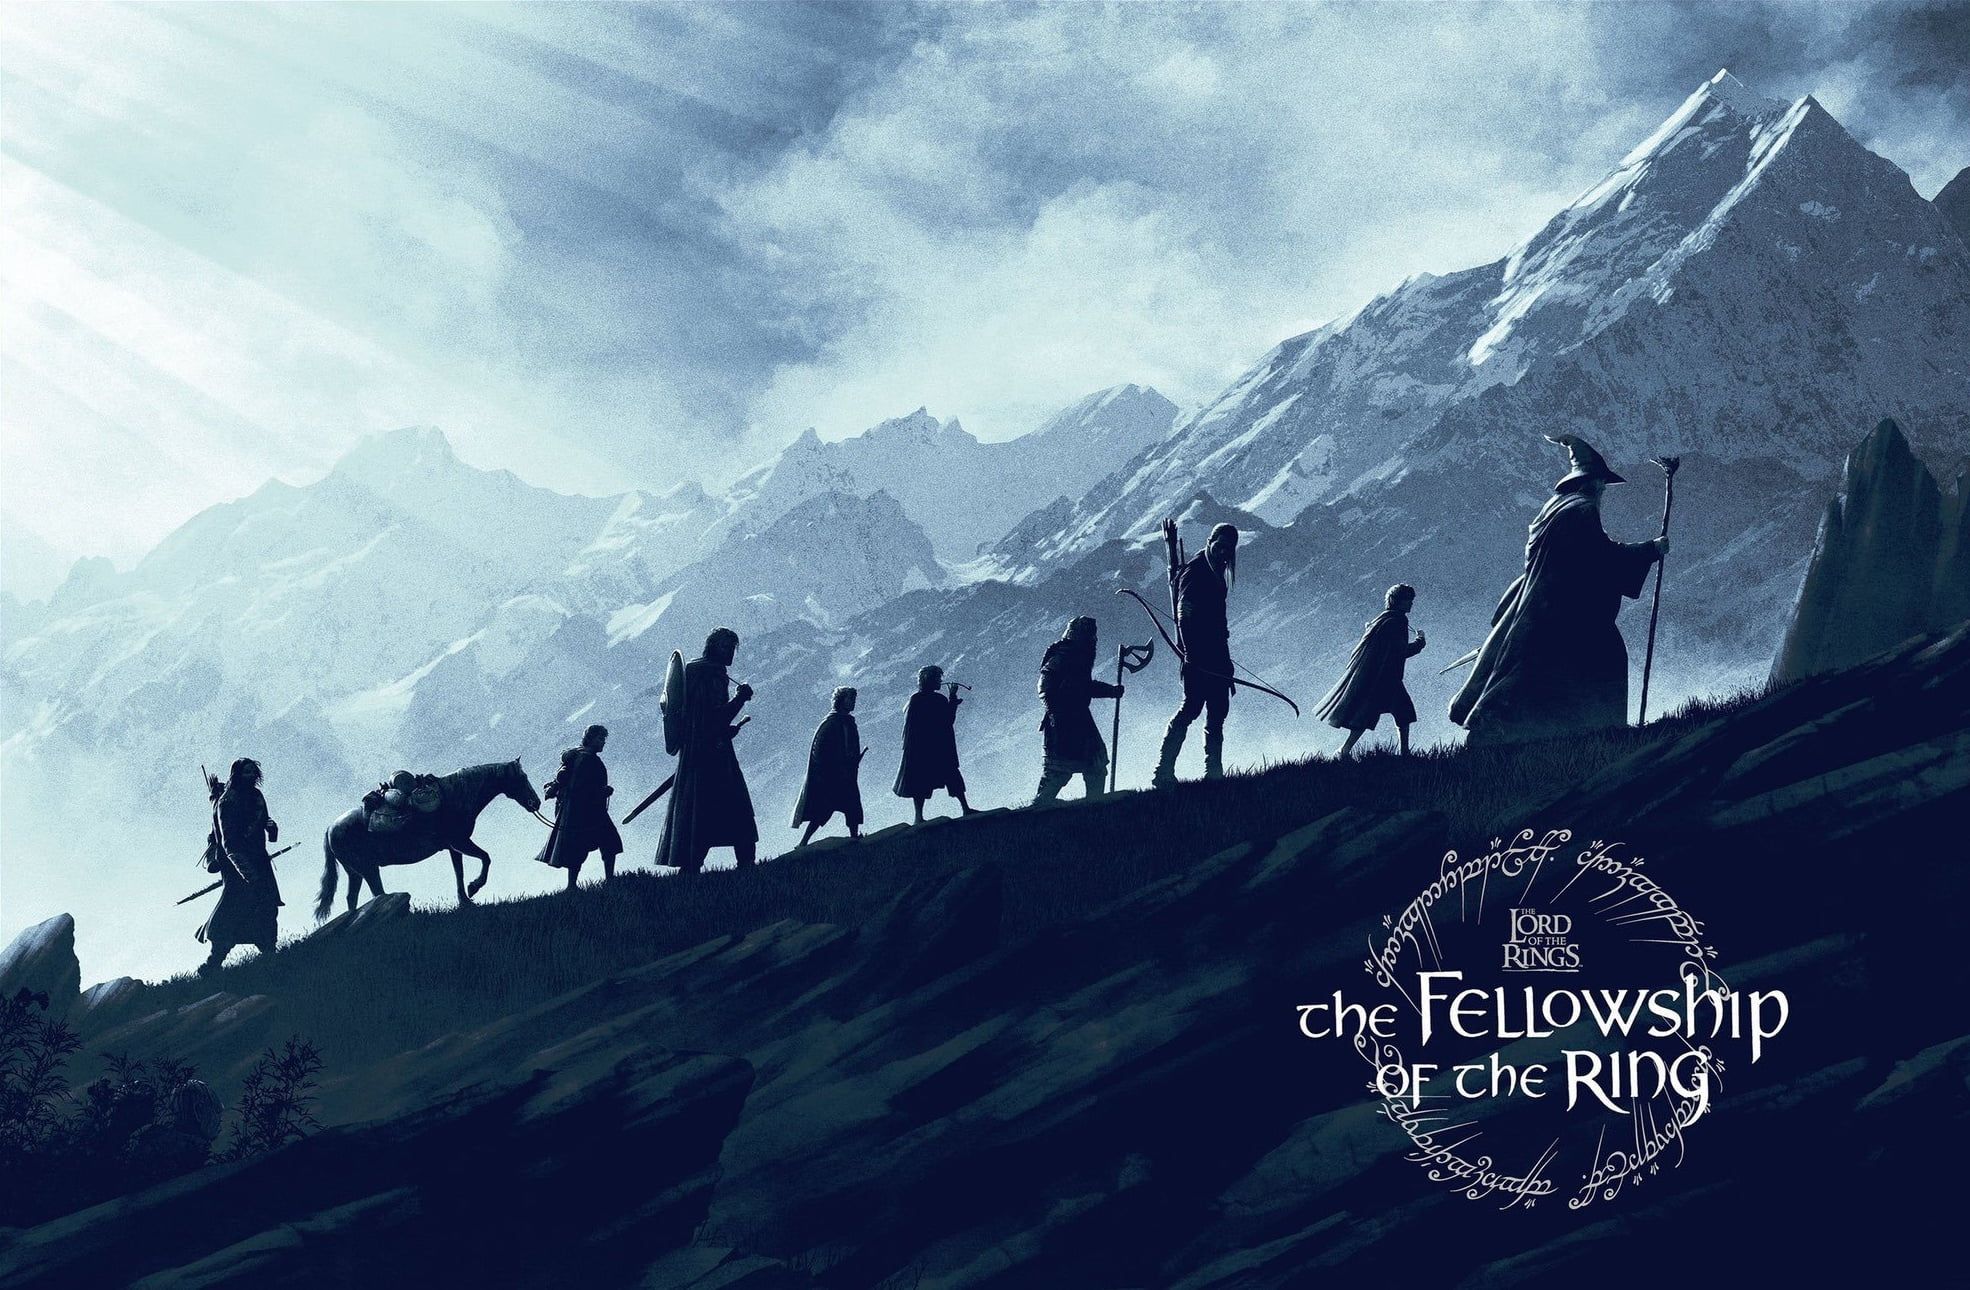 movies fantasy art The Lord of the Rings: The Fellowship of the Ring #artwork #mountains. Lord of the rings tattoo, Fellowship of the ring, Lord of the rings